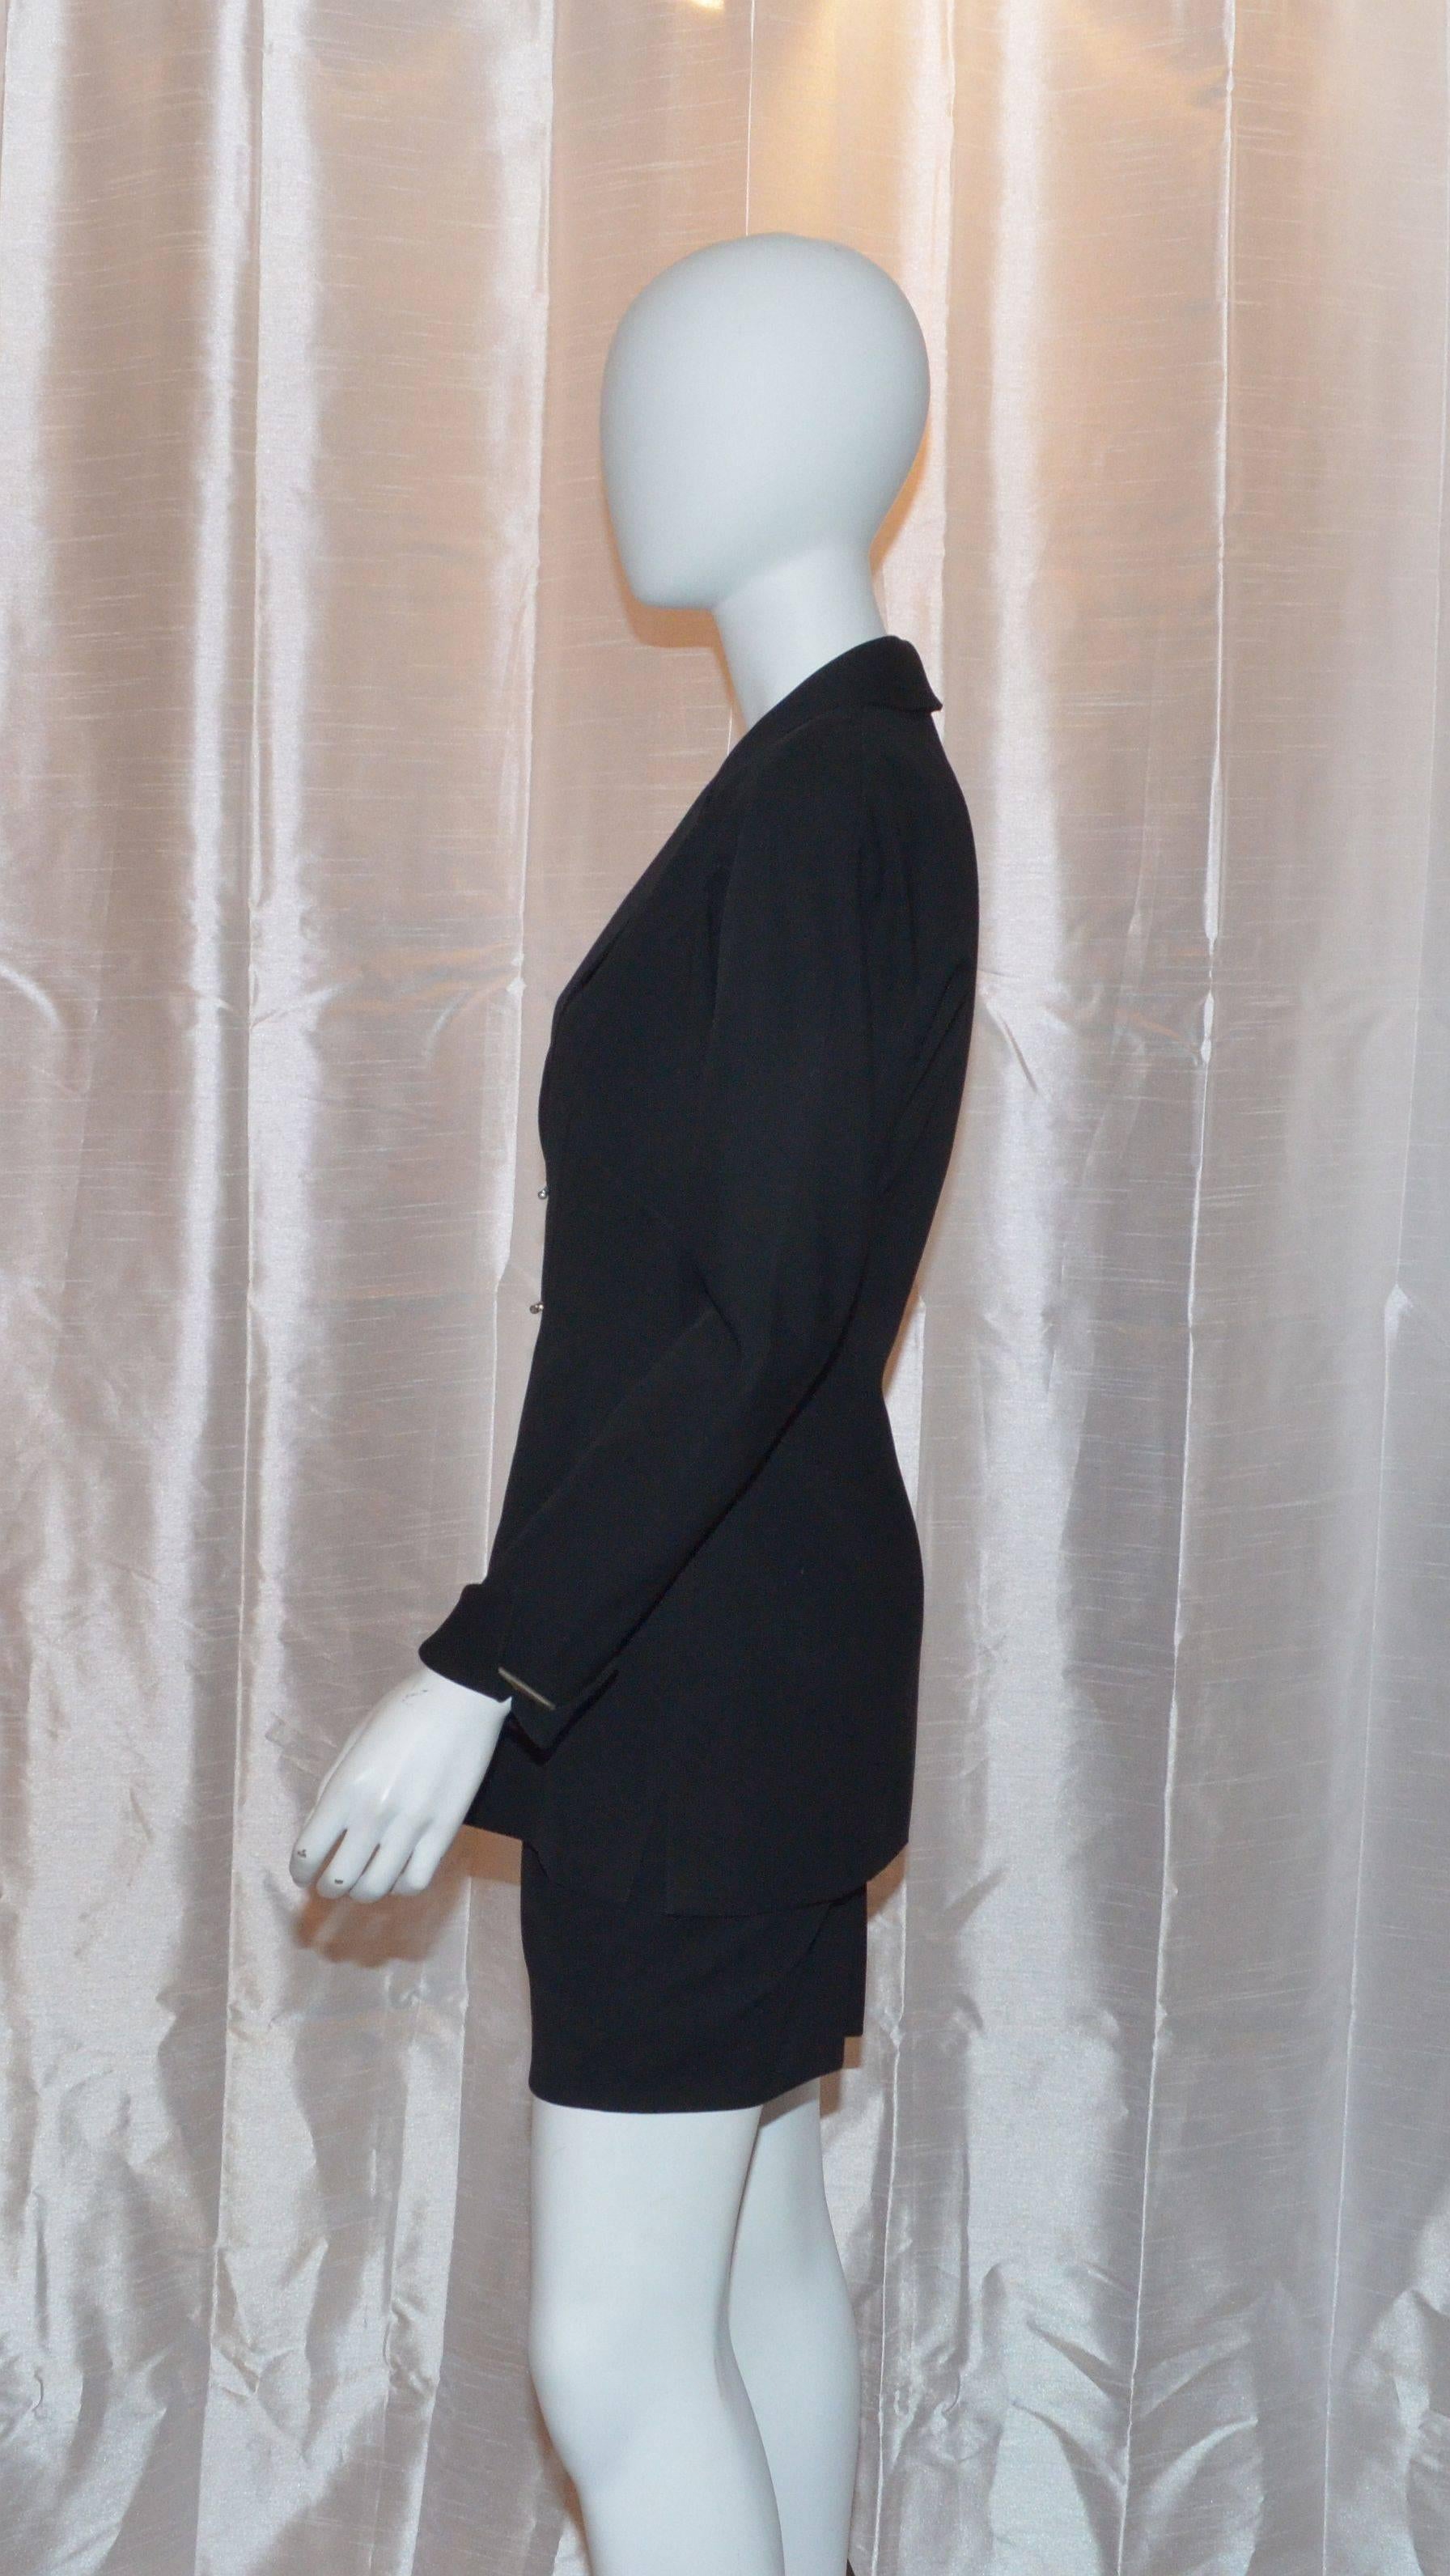 Black Thierry Mugler Jacket and Skirt Suit